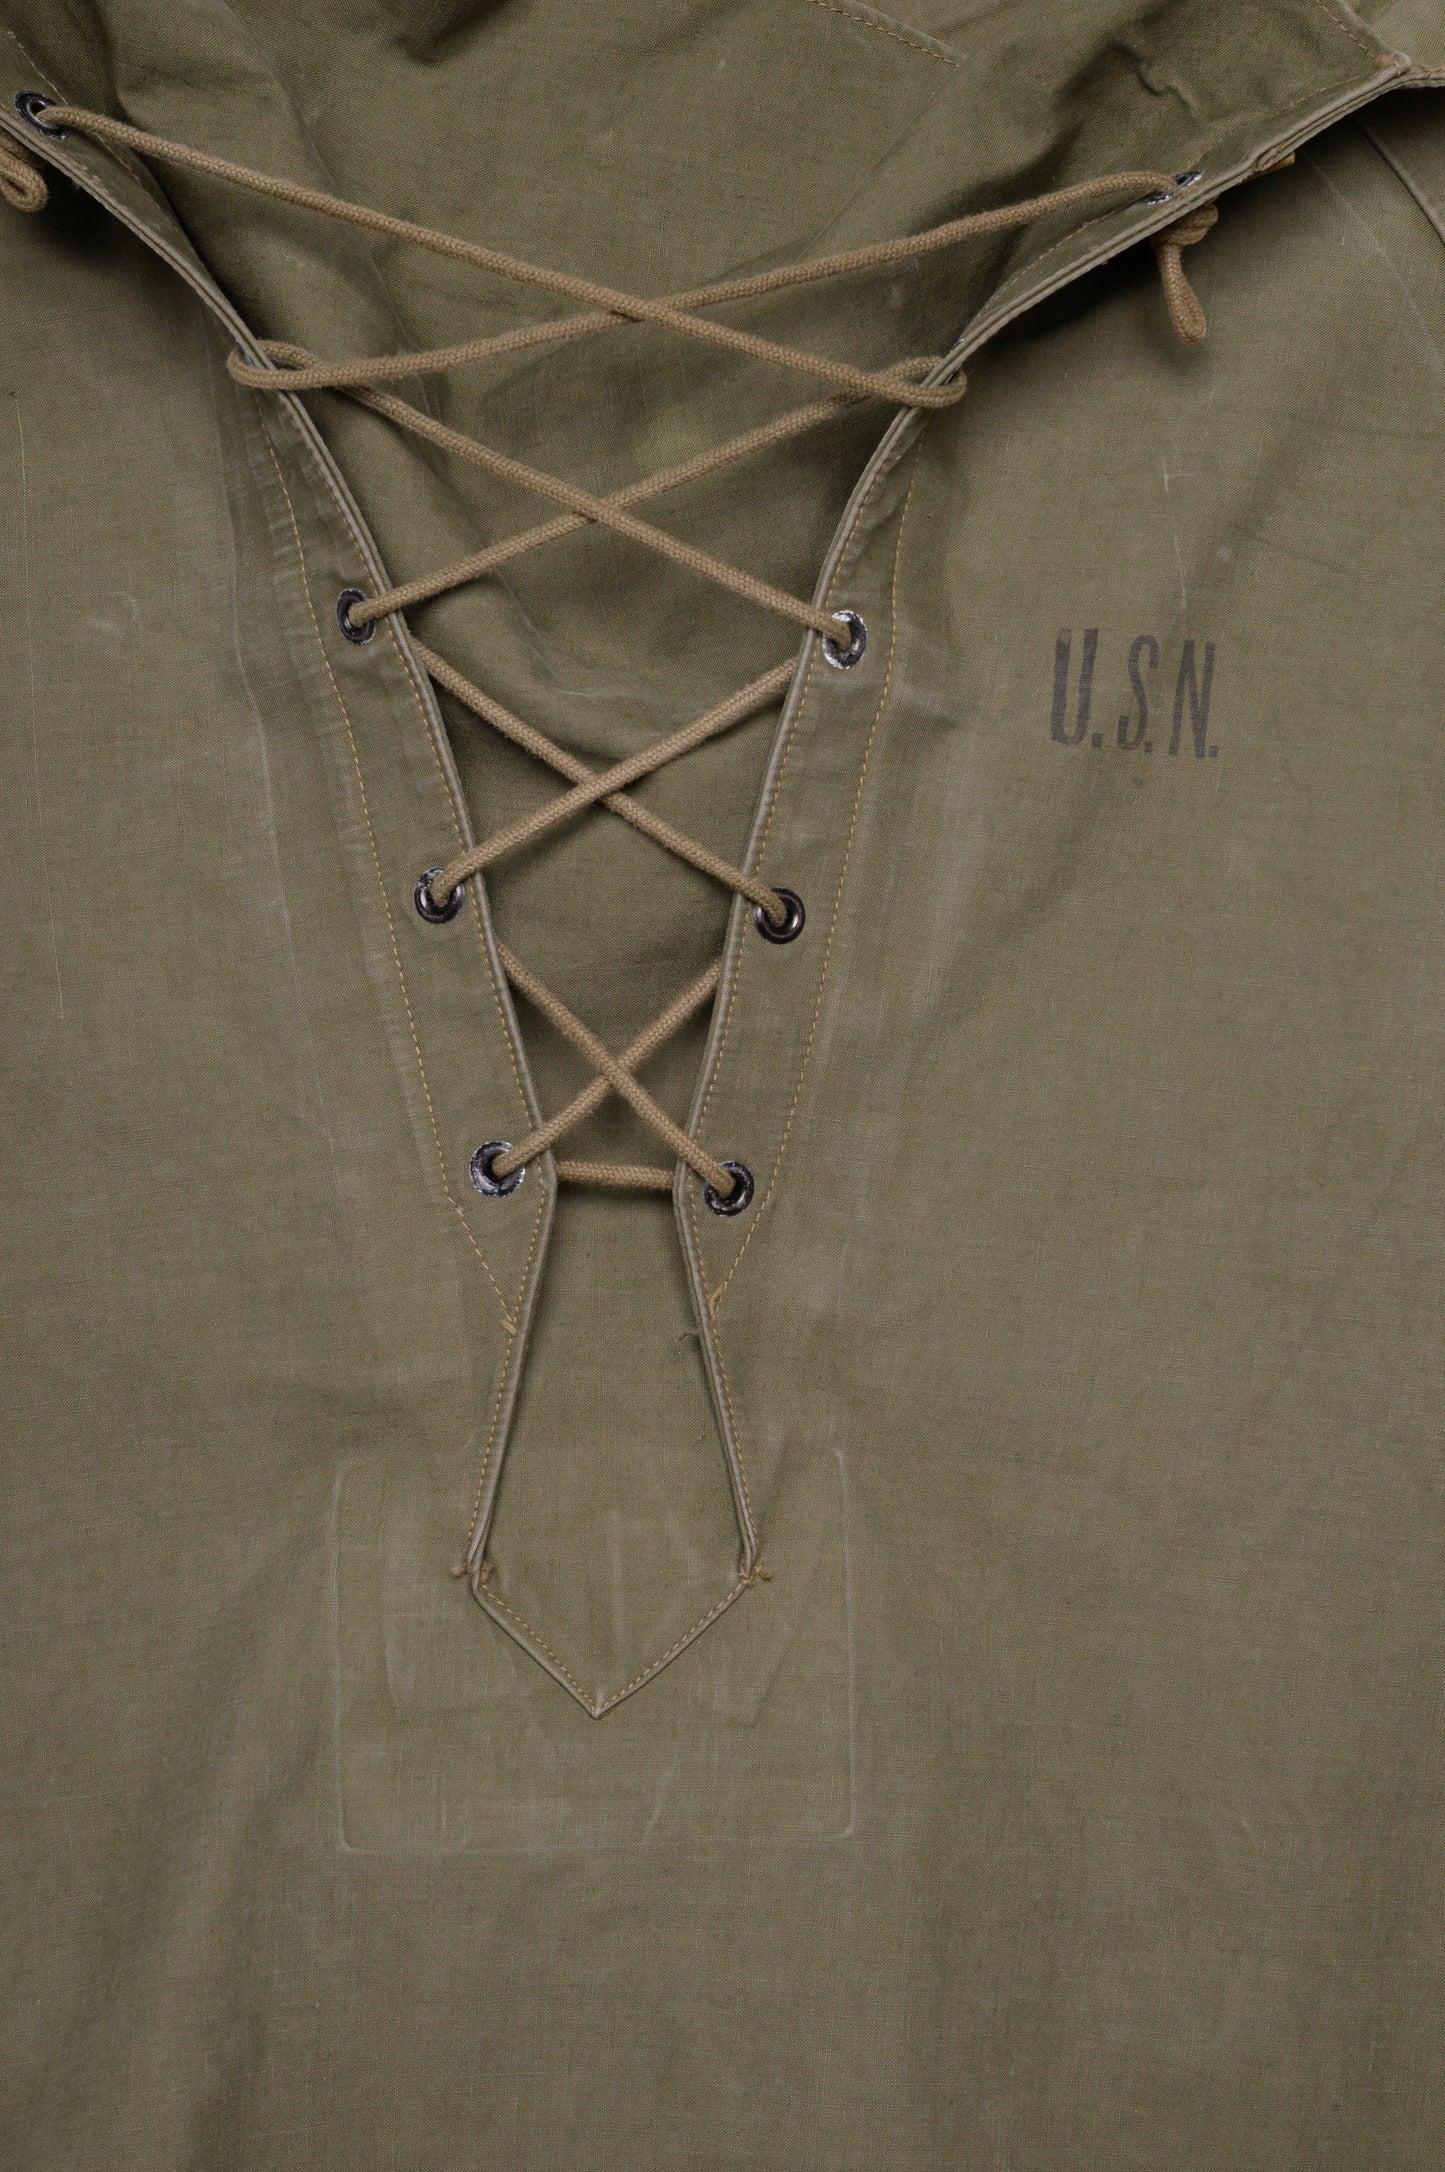 Authentic US Army Jacket